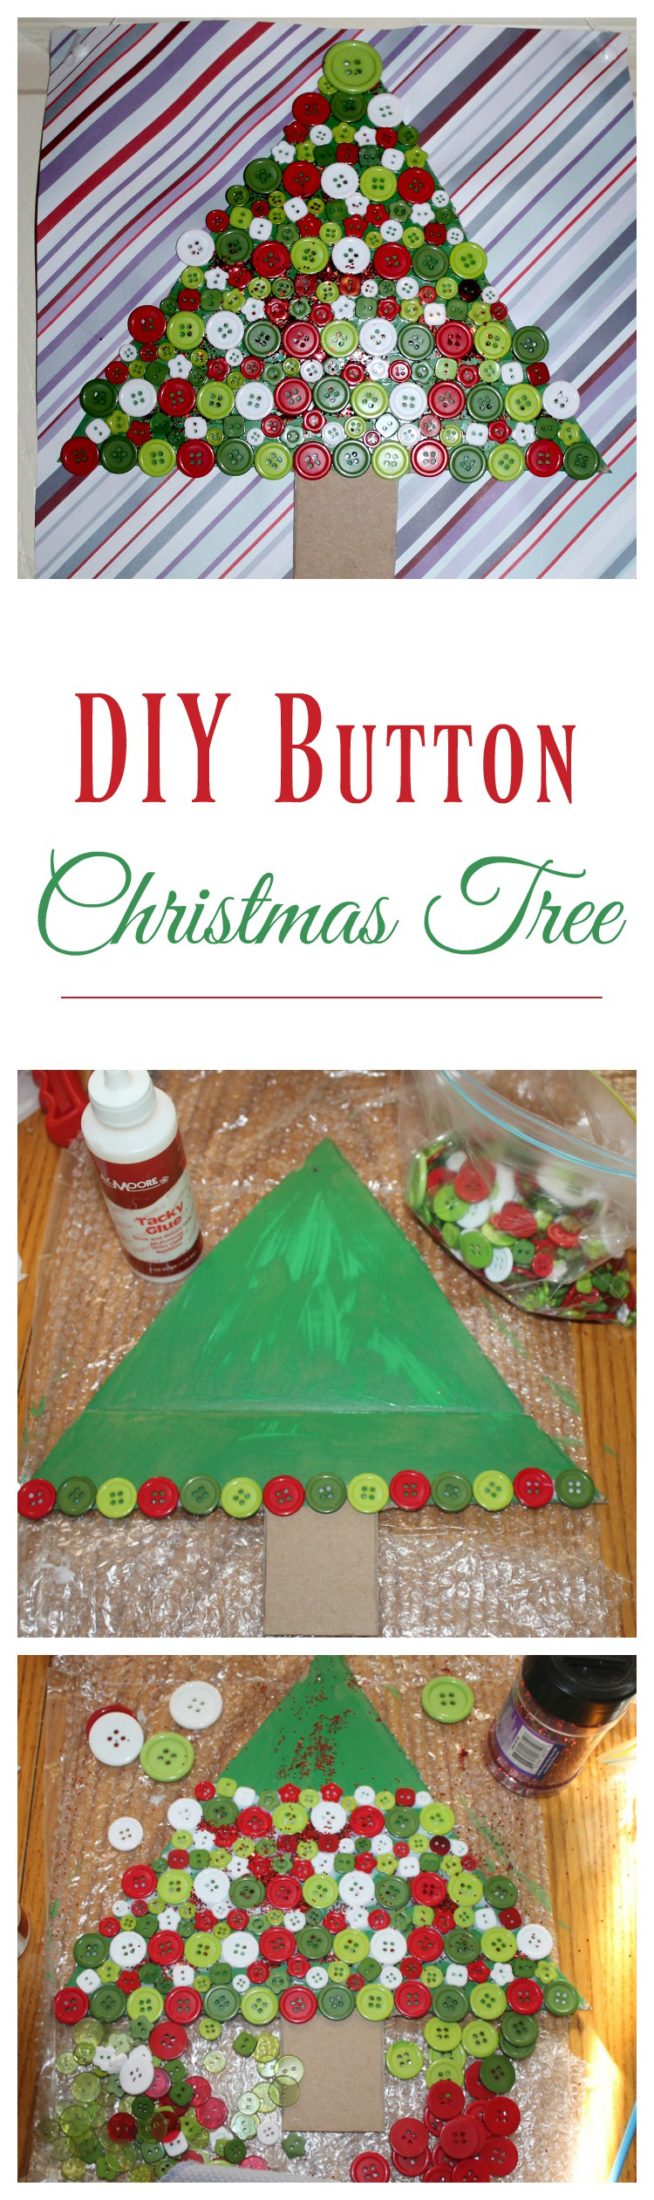 DIY Button Christmas Tree + Tips to Deck Your Small Halls for the Holidays!